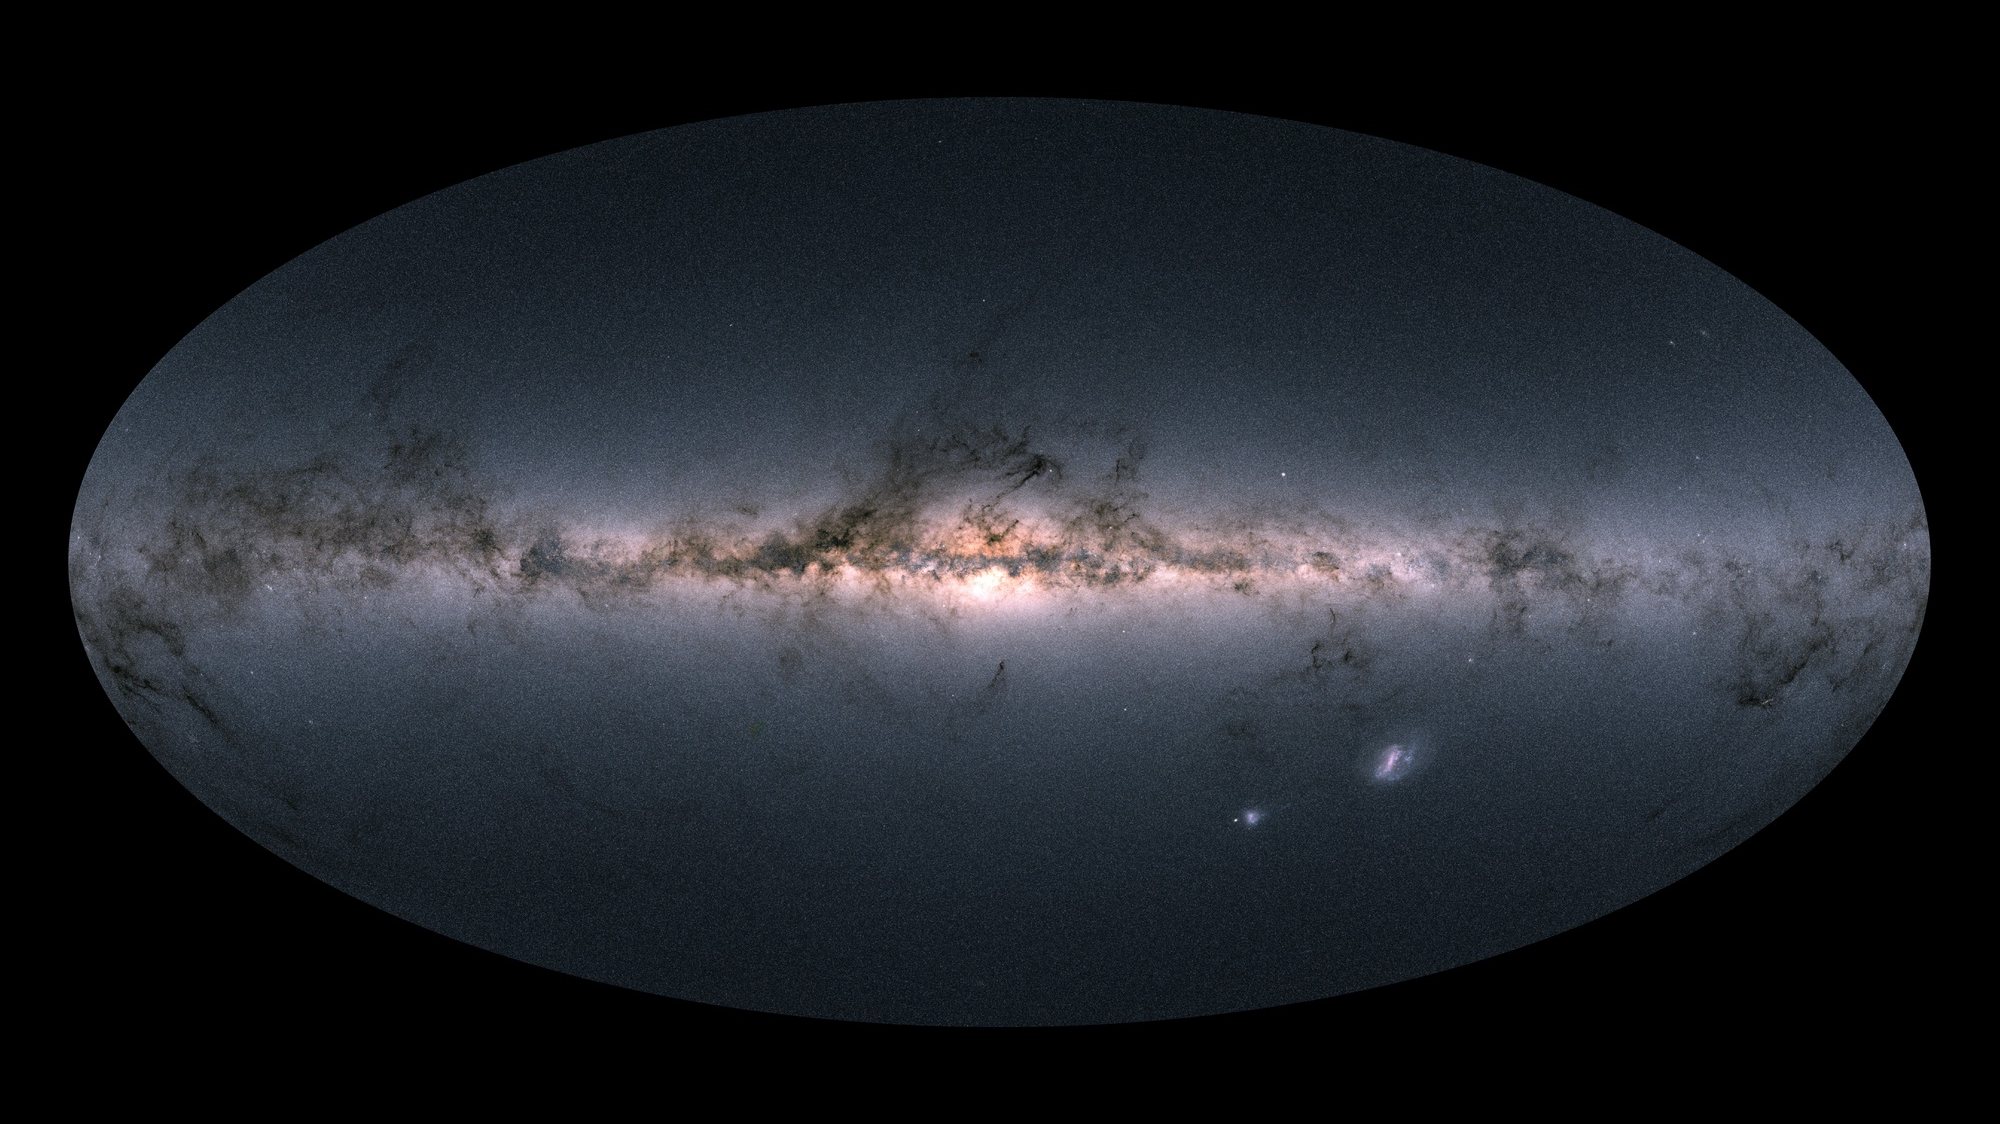 epa06692066 An undated handout photo made available by the European Space Agency (ESA) on 25 April 2018 shows Gaia’s all-sky view of our Milky Way Galaxy and neighbouring galaxies, based on measurements of nearly 1.7 billion stars. The map shows the total brightness and colour of stars observed by the ESA satellite in each portion of the sky between July 2014 and May 2016.  EPA/ESA/Gaia/DPAC / HANDOUT  HANDOUT EDITORIAL USE ONLY/NO SALES